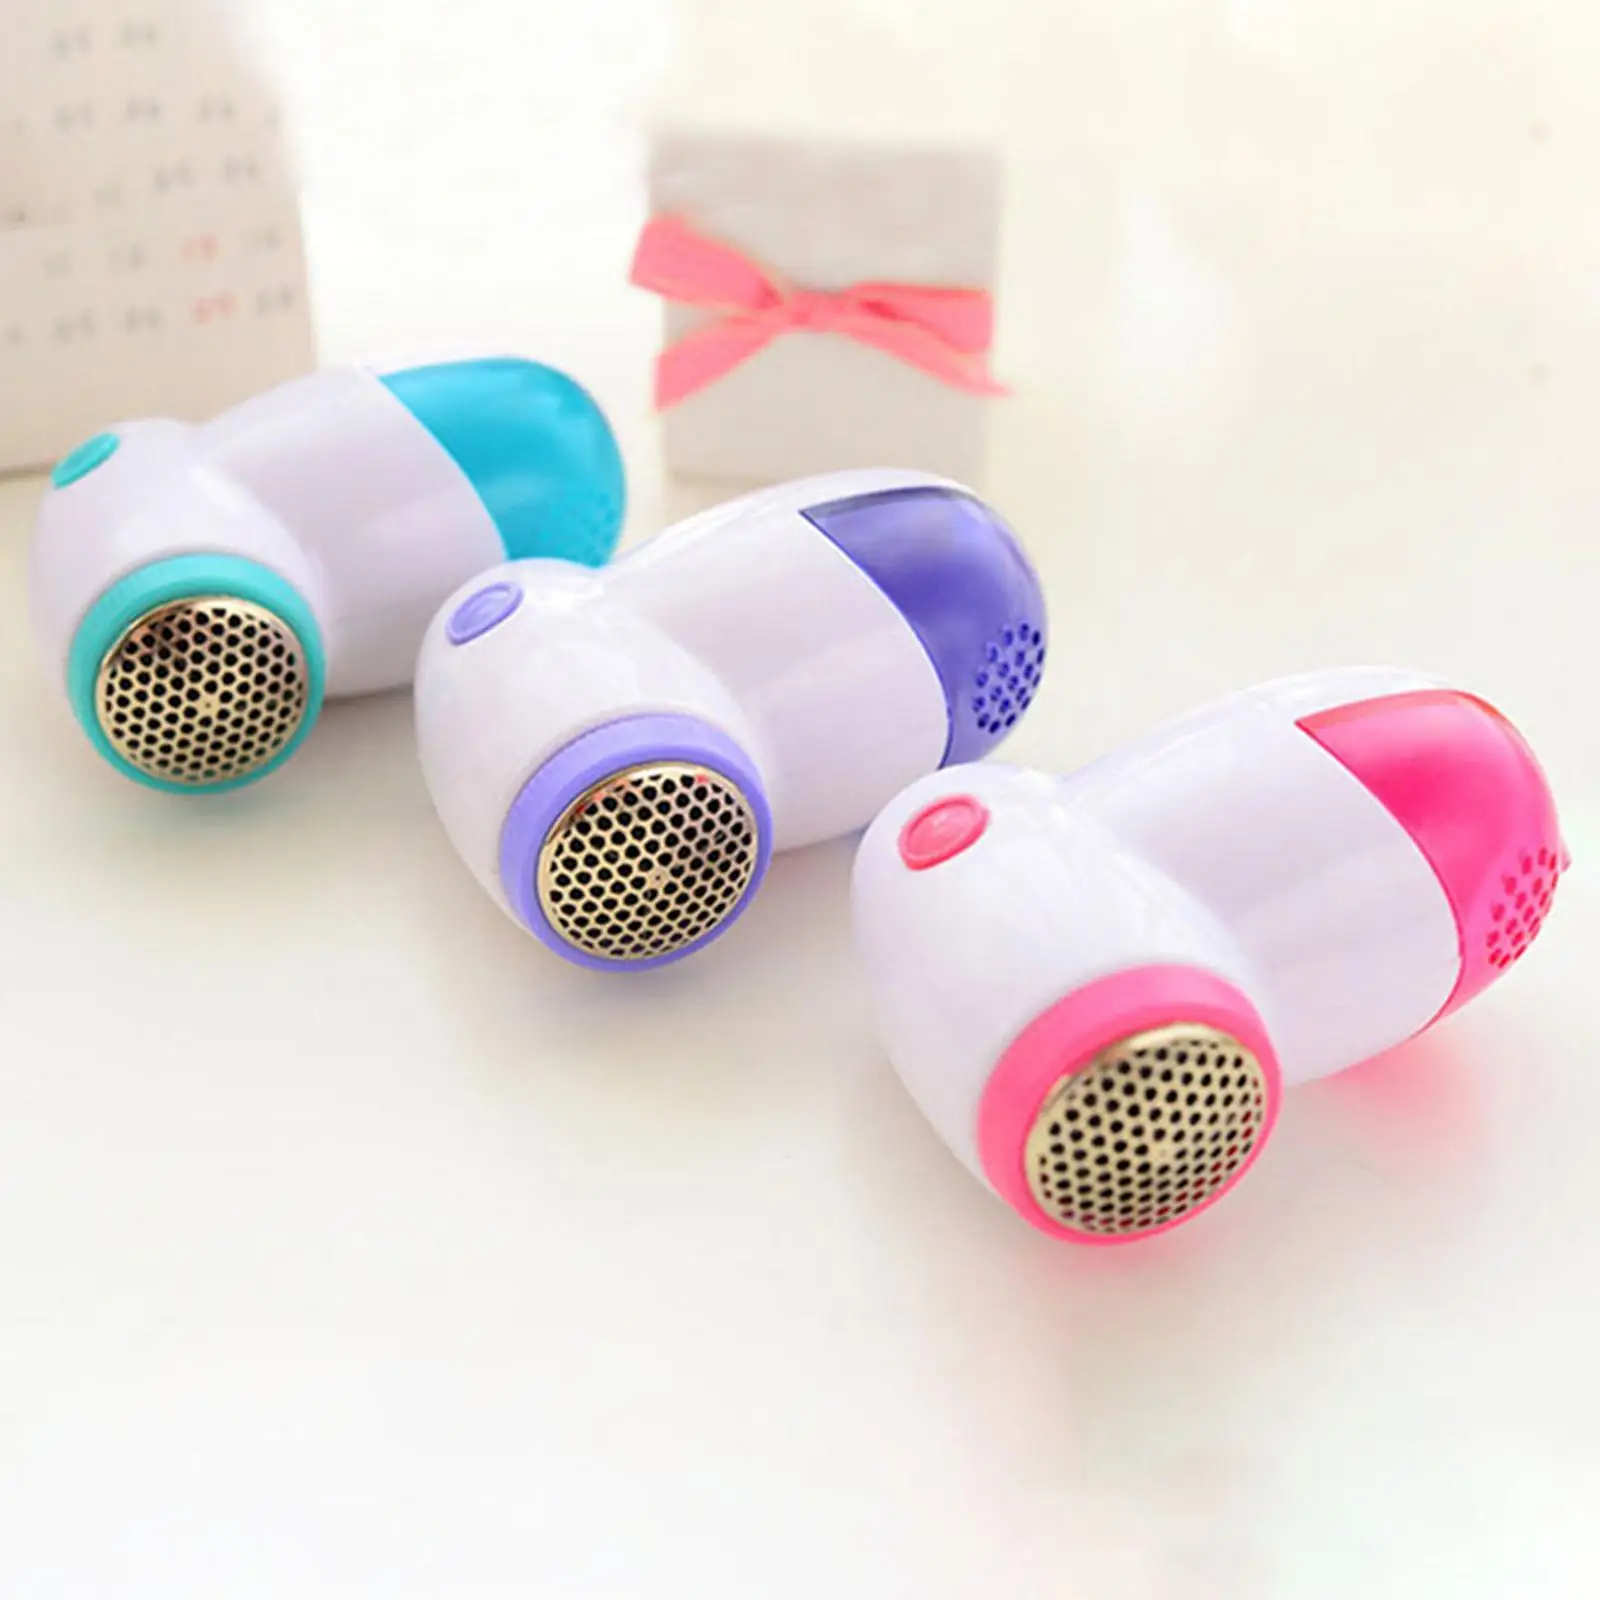 

Mini Remove Sweater Pilling Machine Electric Clothes Fabric Shaver Hair Ball Trimmer Lint Fuzz Shaver Fluff Wool Granule Brushes